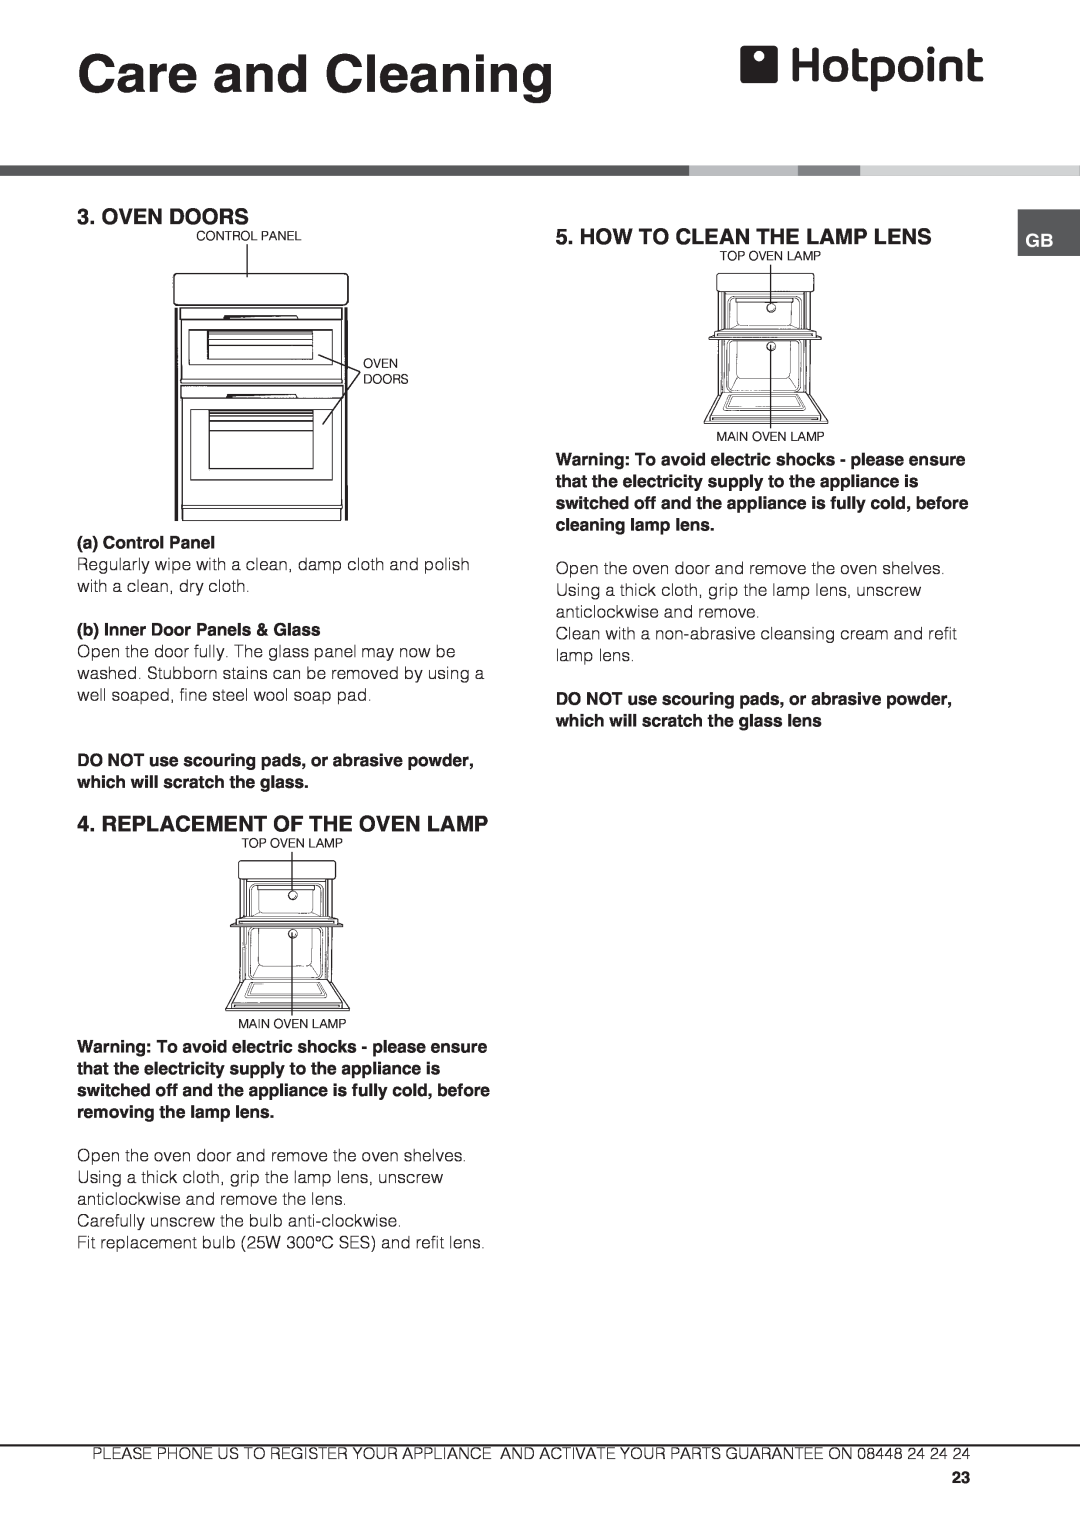 Hotpoint DX 892 CX S manual Care and Cleaning, Oven Doors, How To Clean The Lamp Lens, Replacement Of The Oven Lamp 